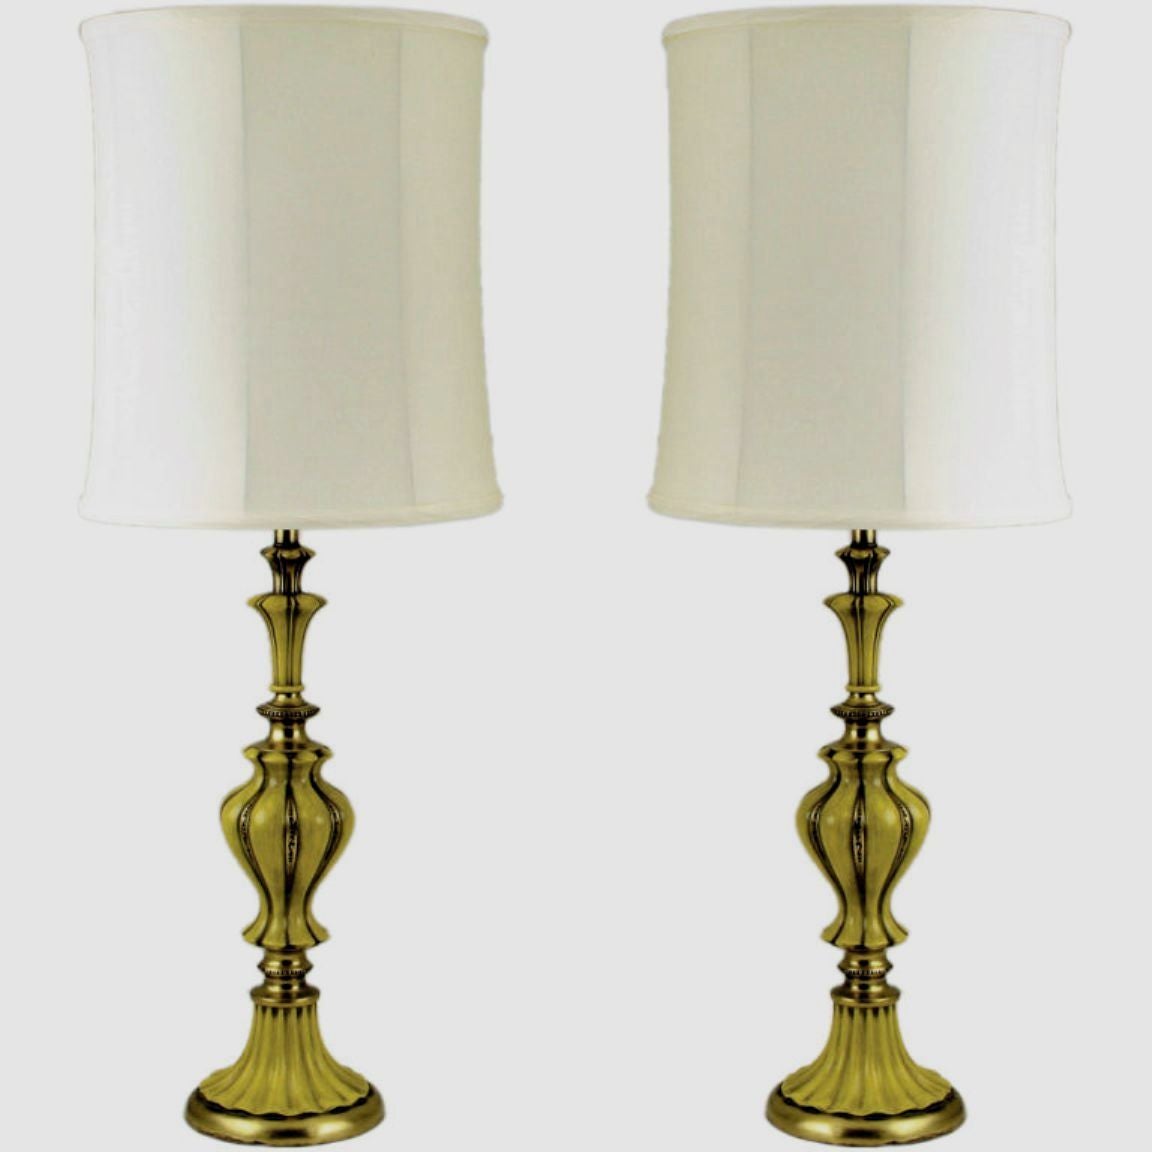 Pair of Rembrandt Brass and Antiqued Saffron Yellow Table Lamps